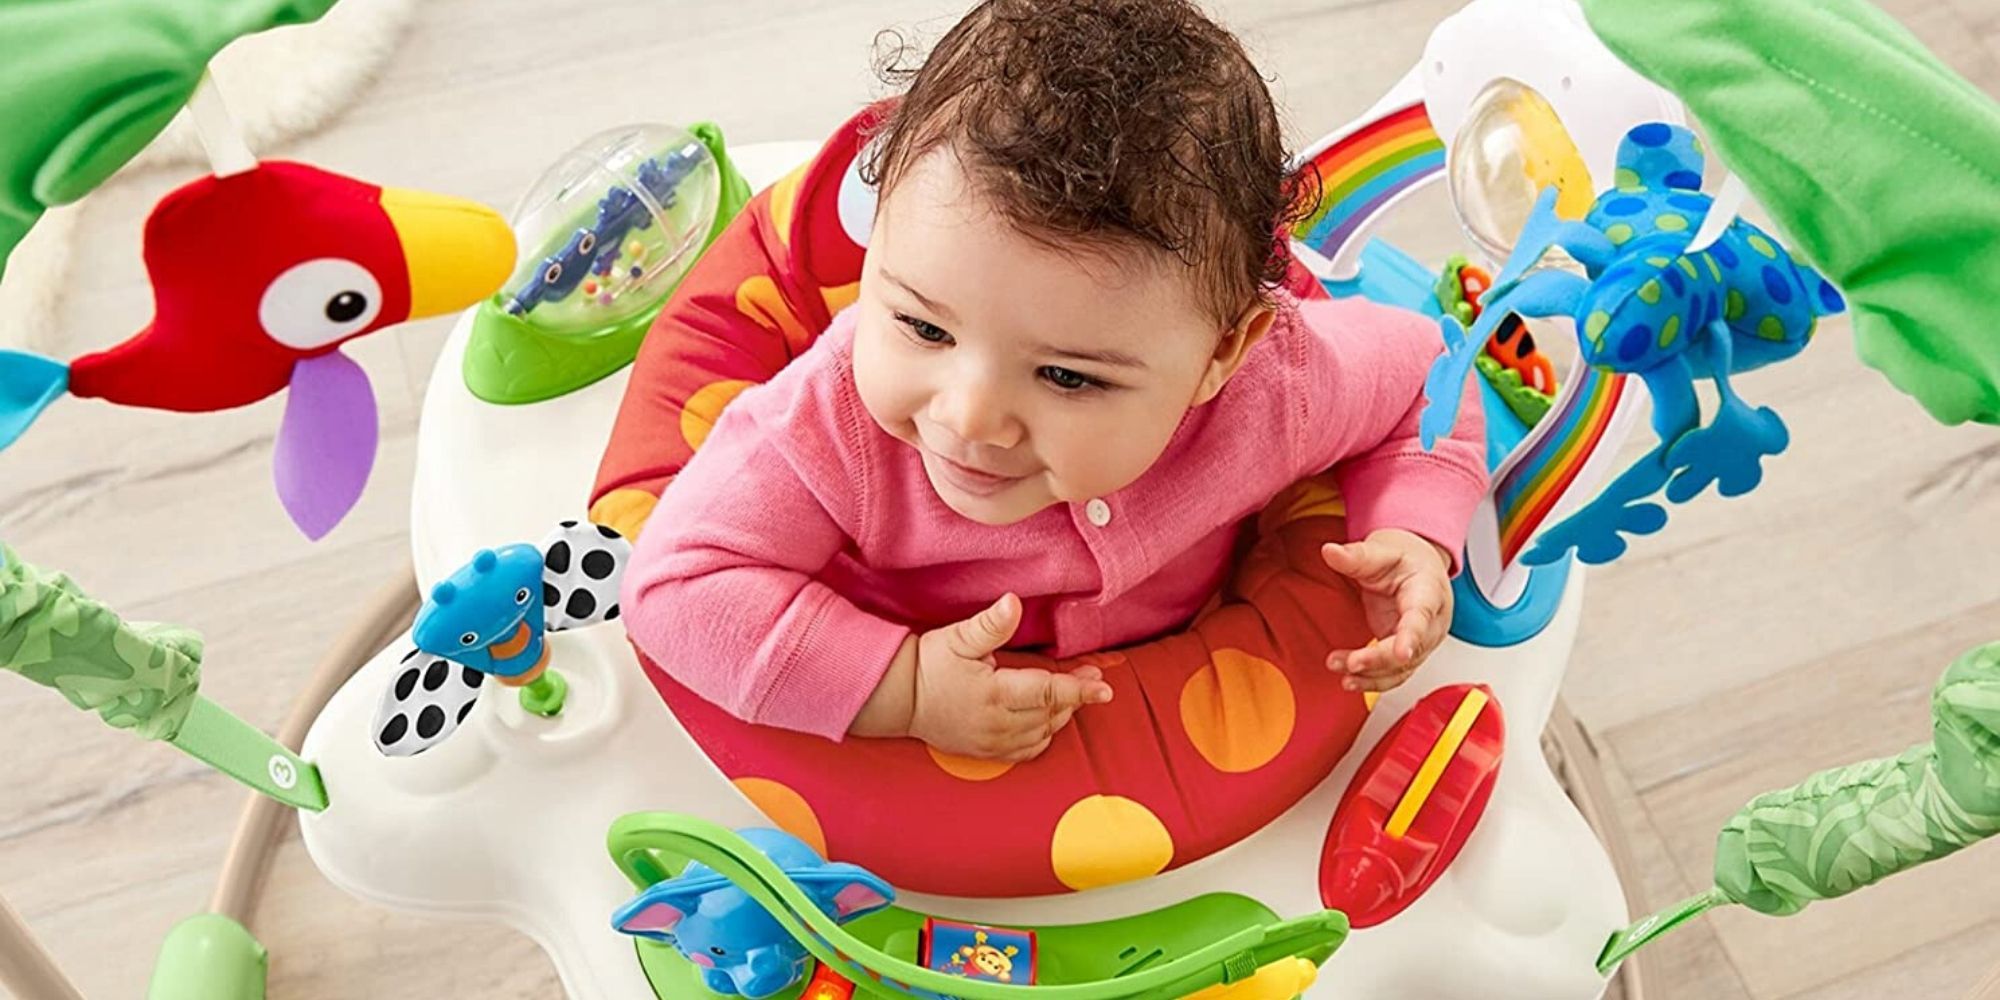 Looking to Buy The Best Baby Jumper in 2023. Top Features to Look For in a Jumperoo